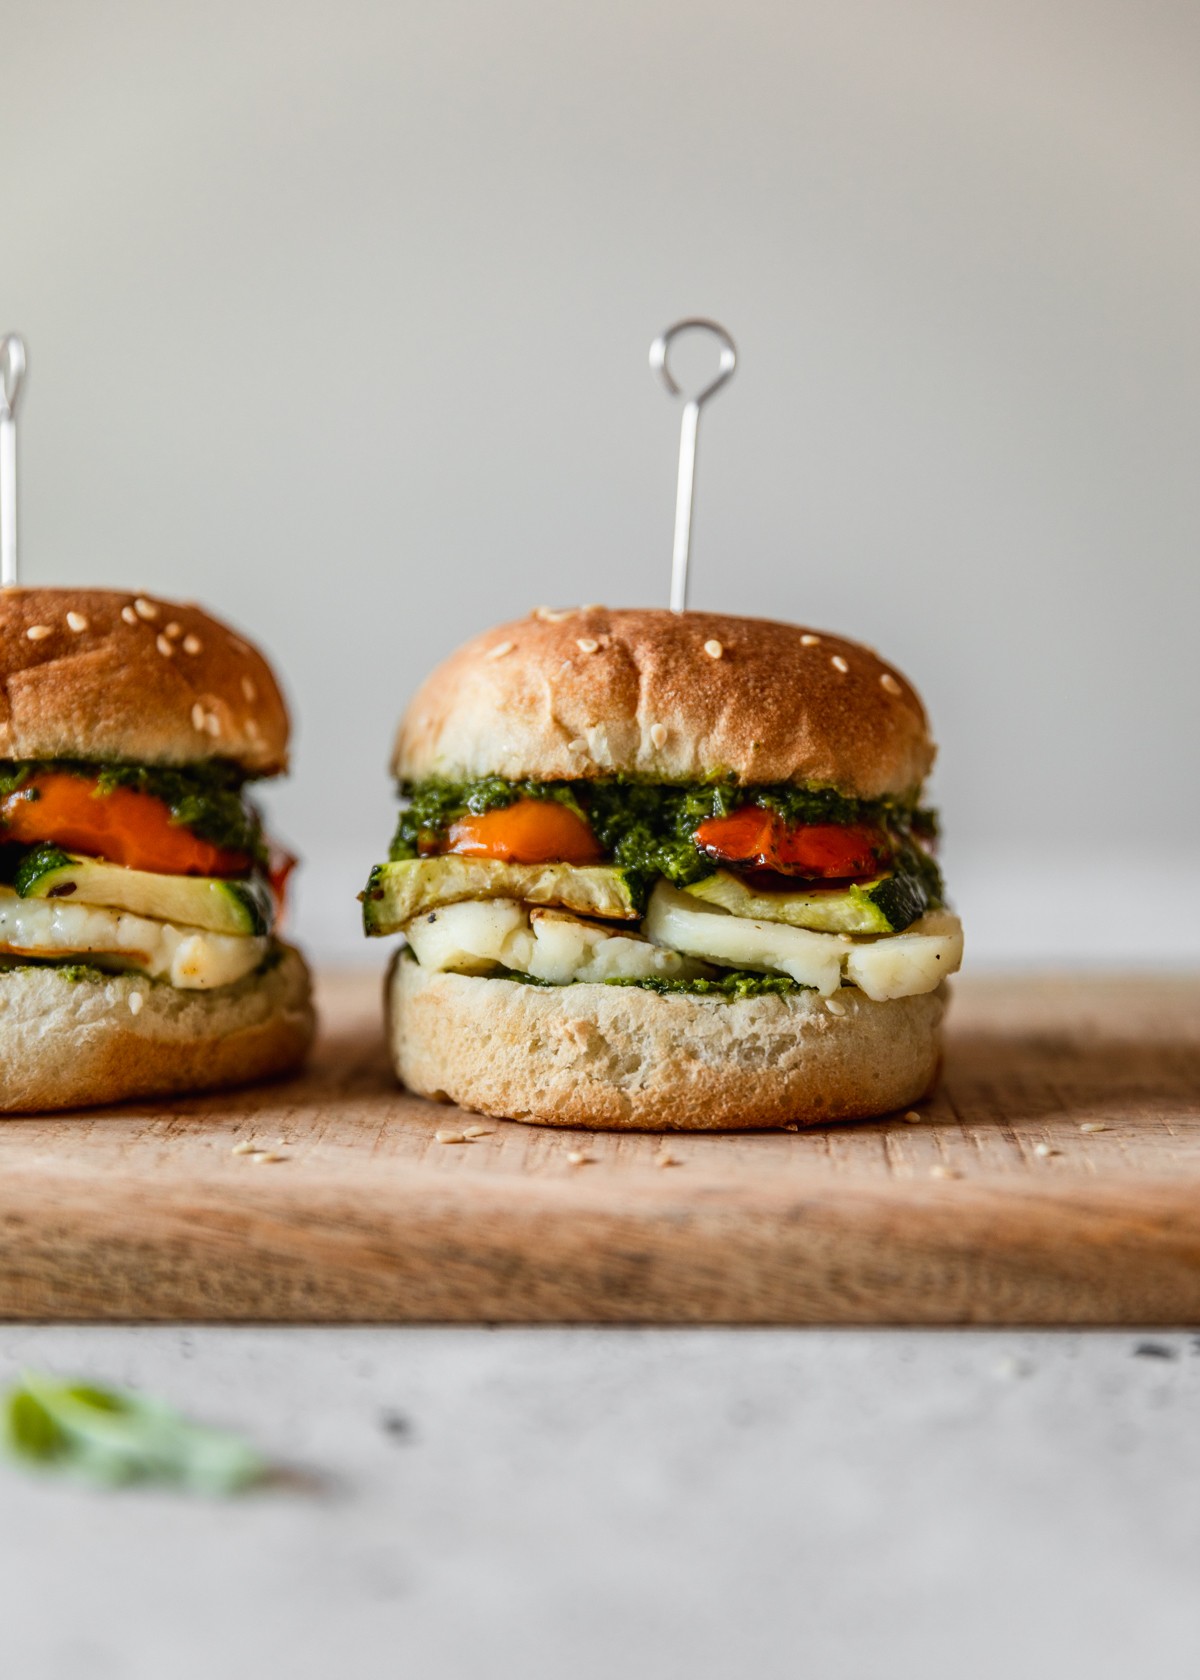 A closeup side image of a halloumi sandwich with veggies and herb sauce topped with a metal pick next to another sandwich on a wood board with a white background.